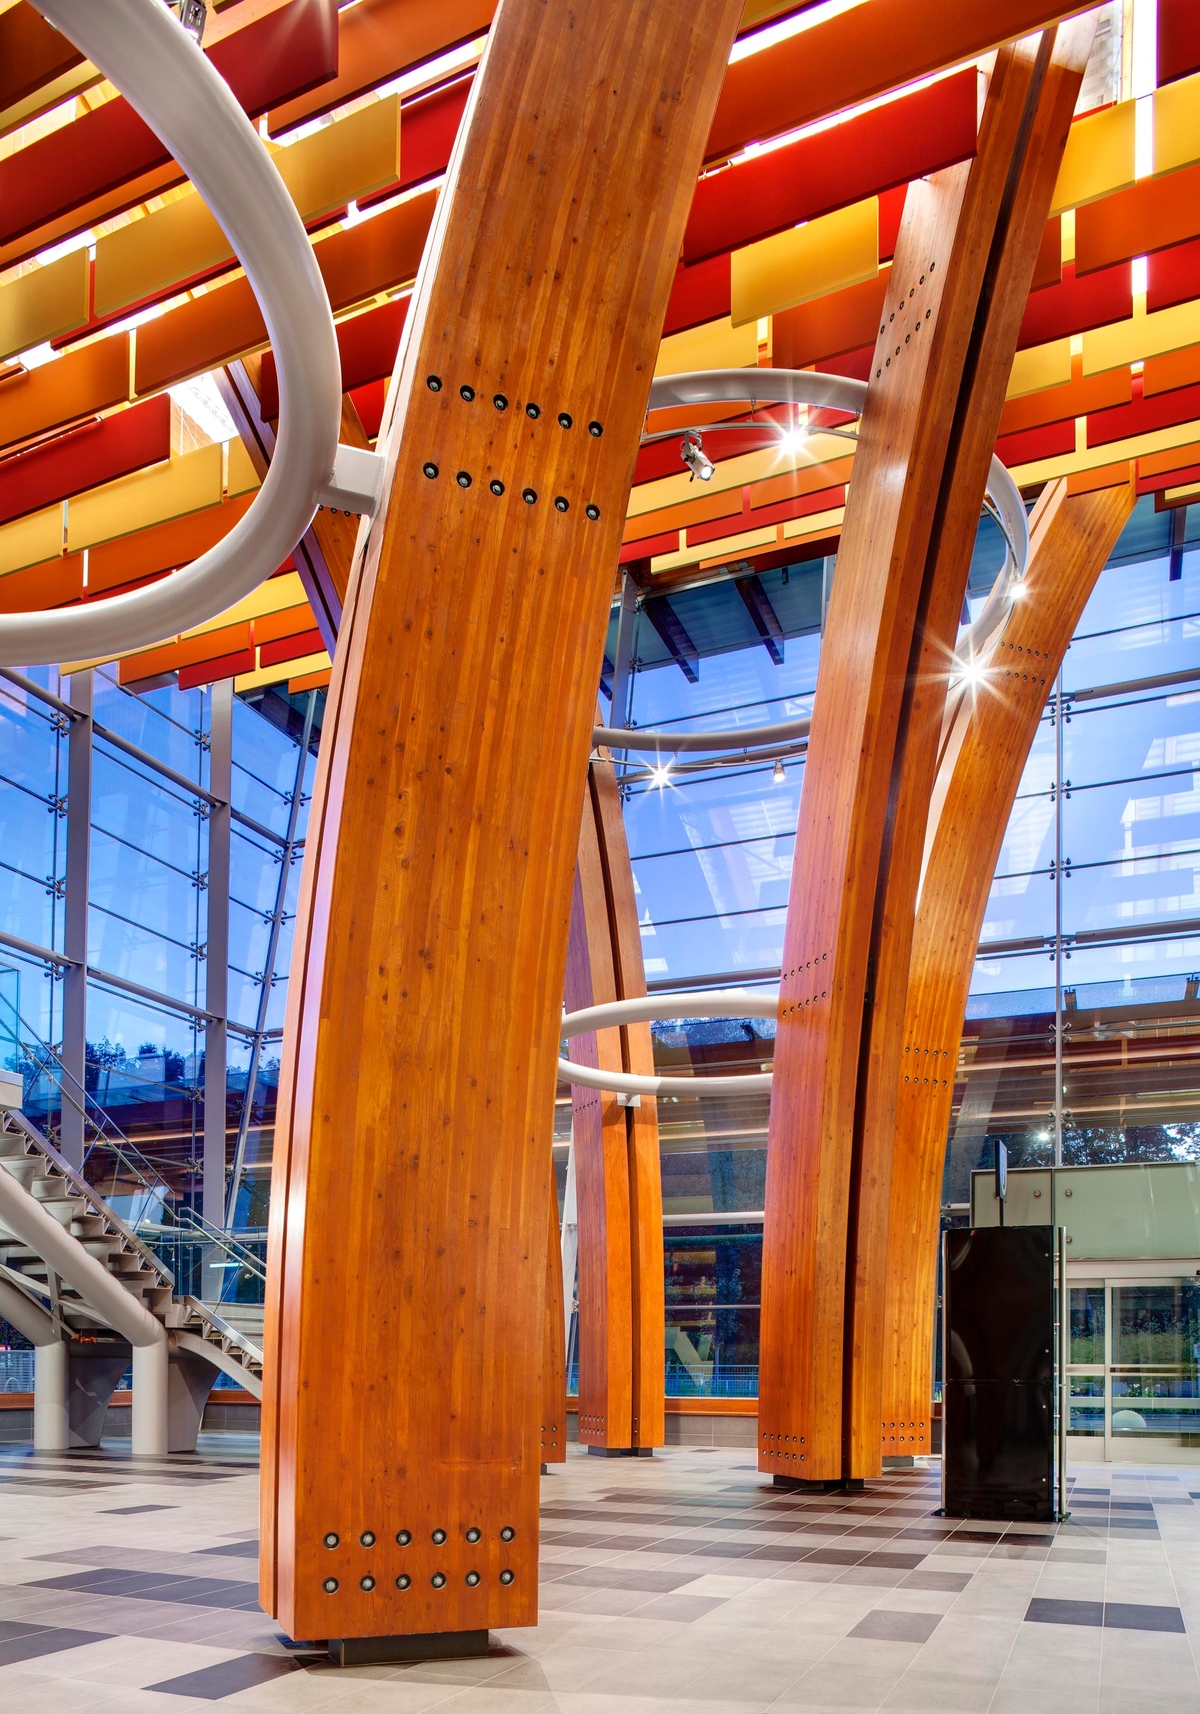 Massive curved glue-laminated timber (Glulam) columns are shown in this close up image of the Surrey Memorial Hospital Emergency Department + Critical Care Tower main atrium